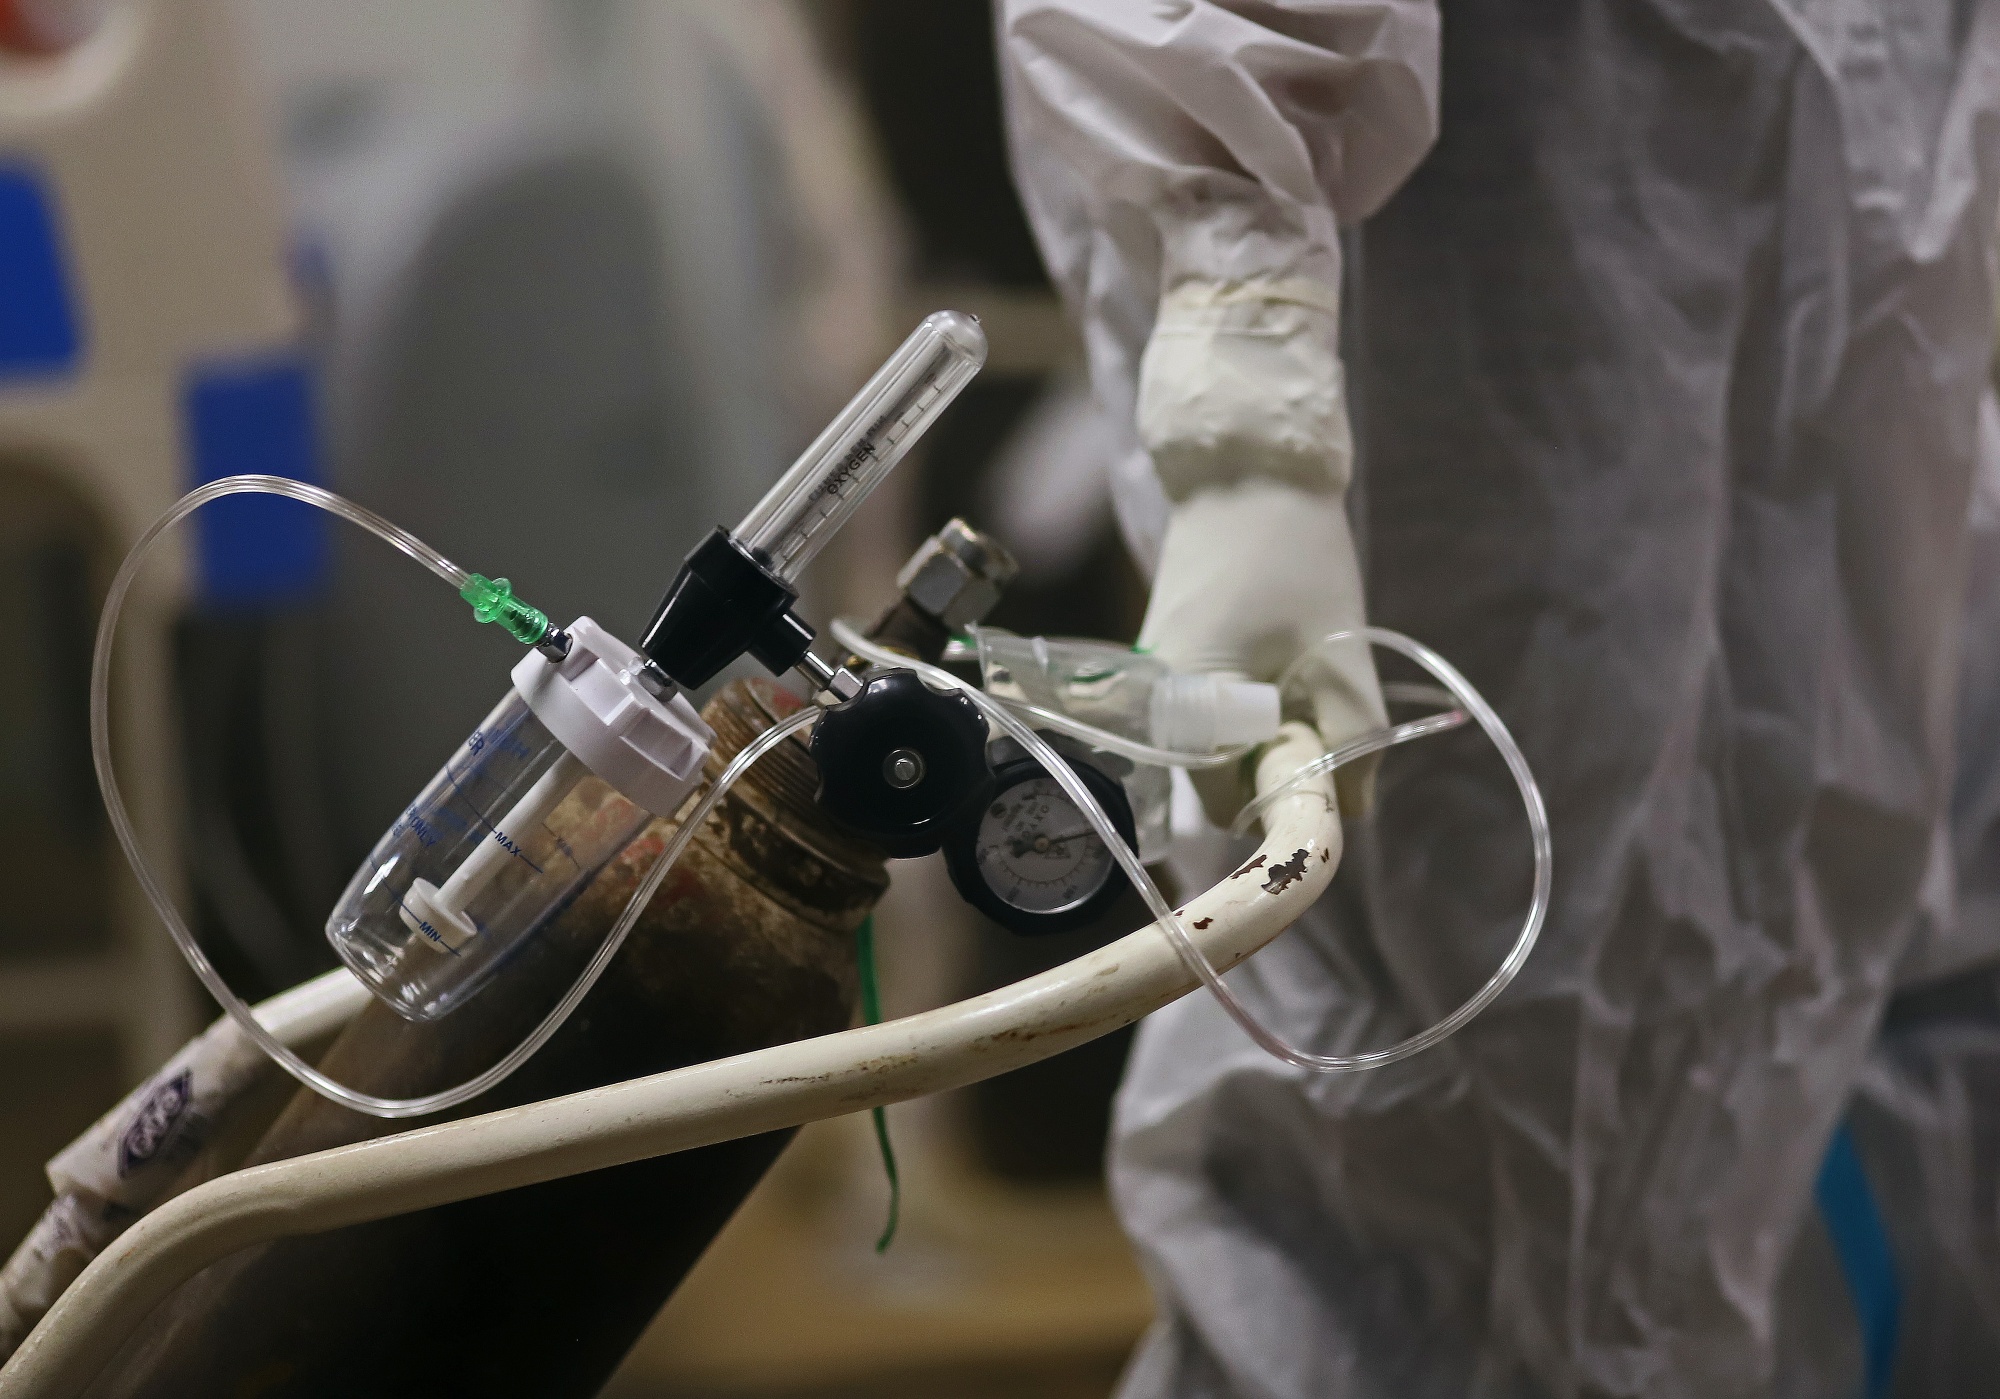 A health worker wheels an oxygen canister in a Covid-19 hospital set up inside a stadium in New Delhi on April 23.